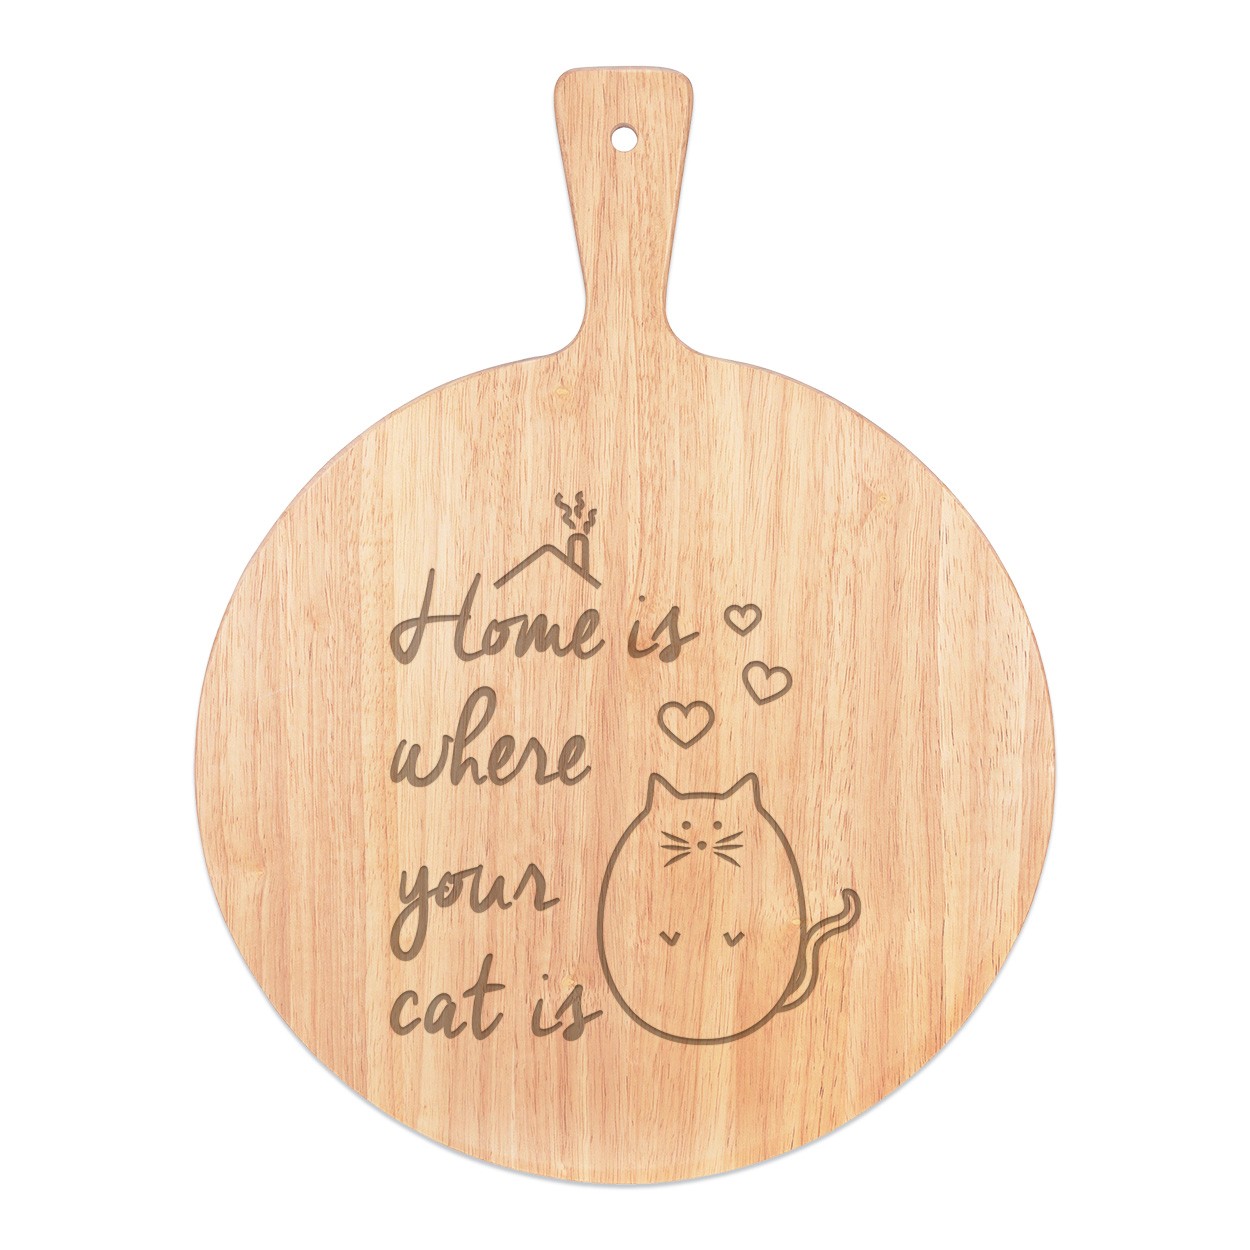 Home Is Where Your Cat Is Pizza Board Paddle Serving Tray Handle Round Wooden 45x34cm